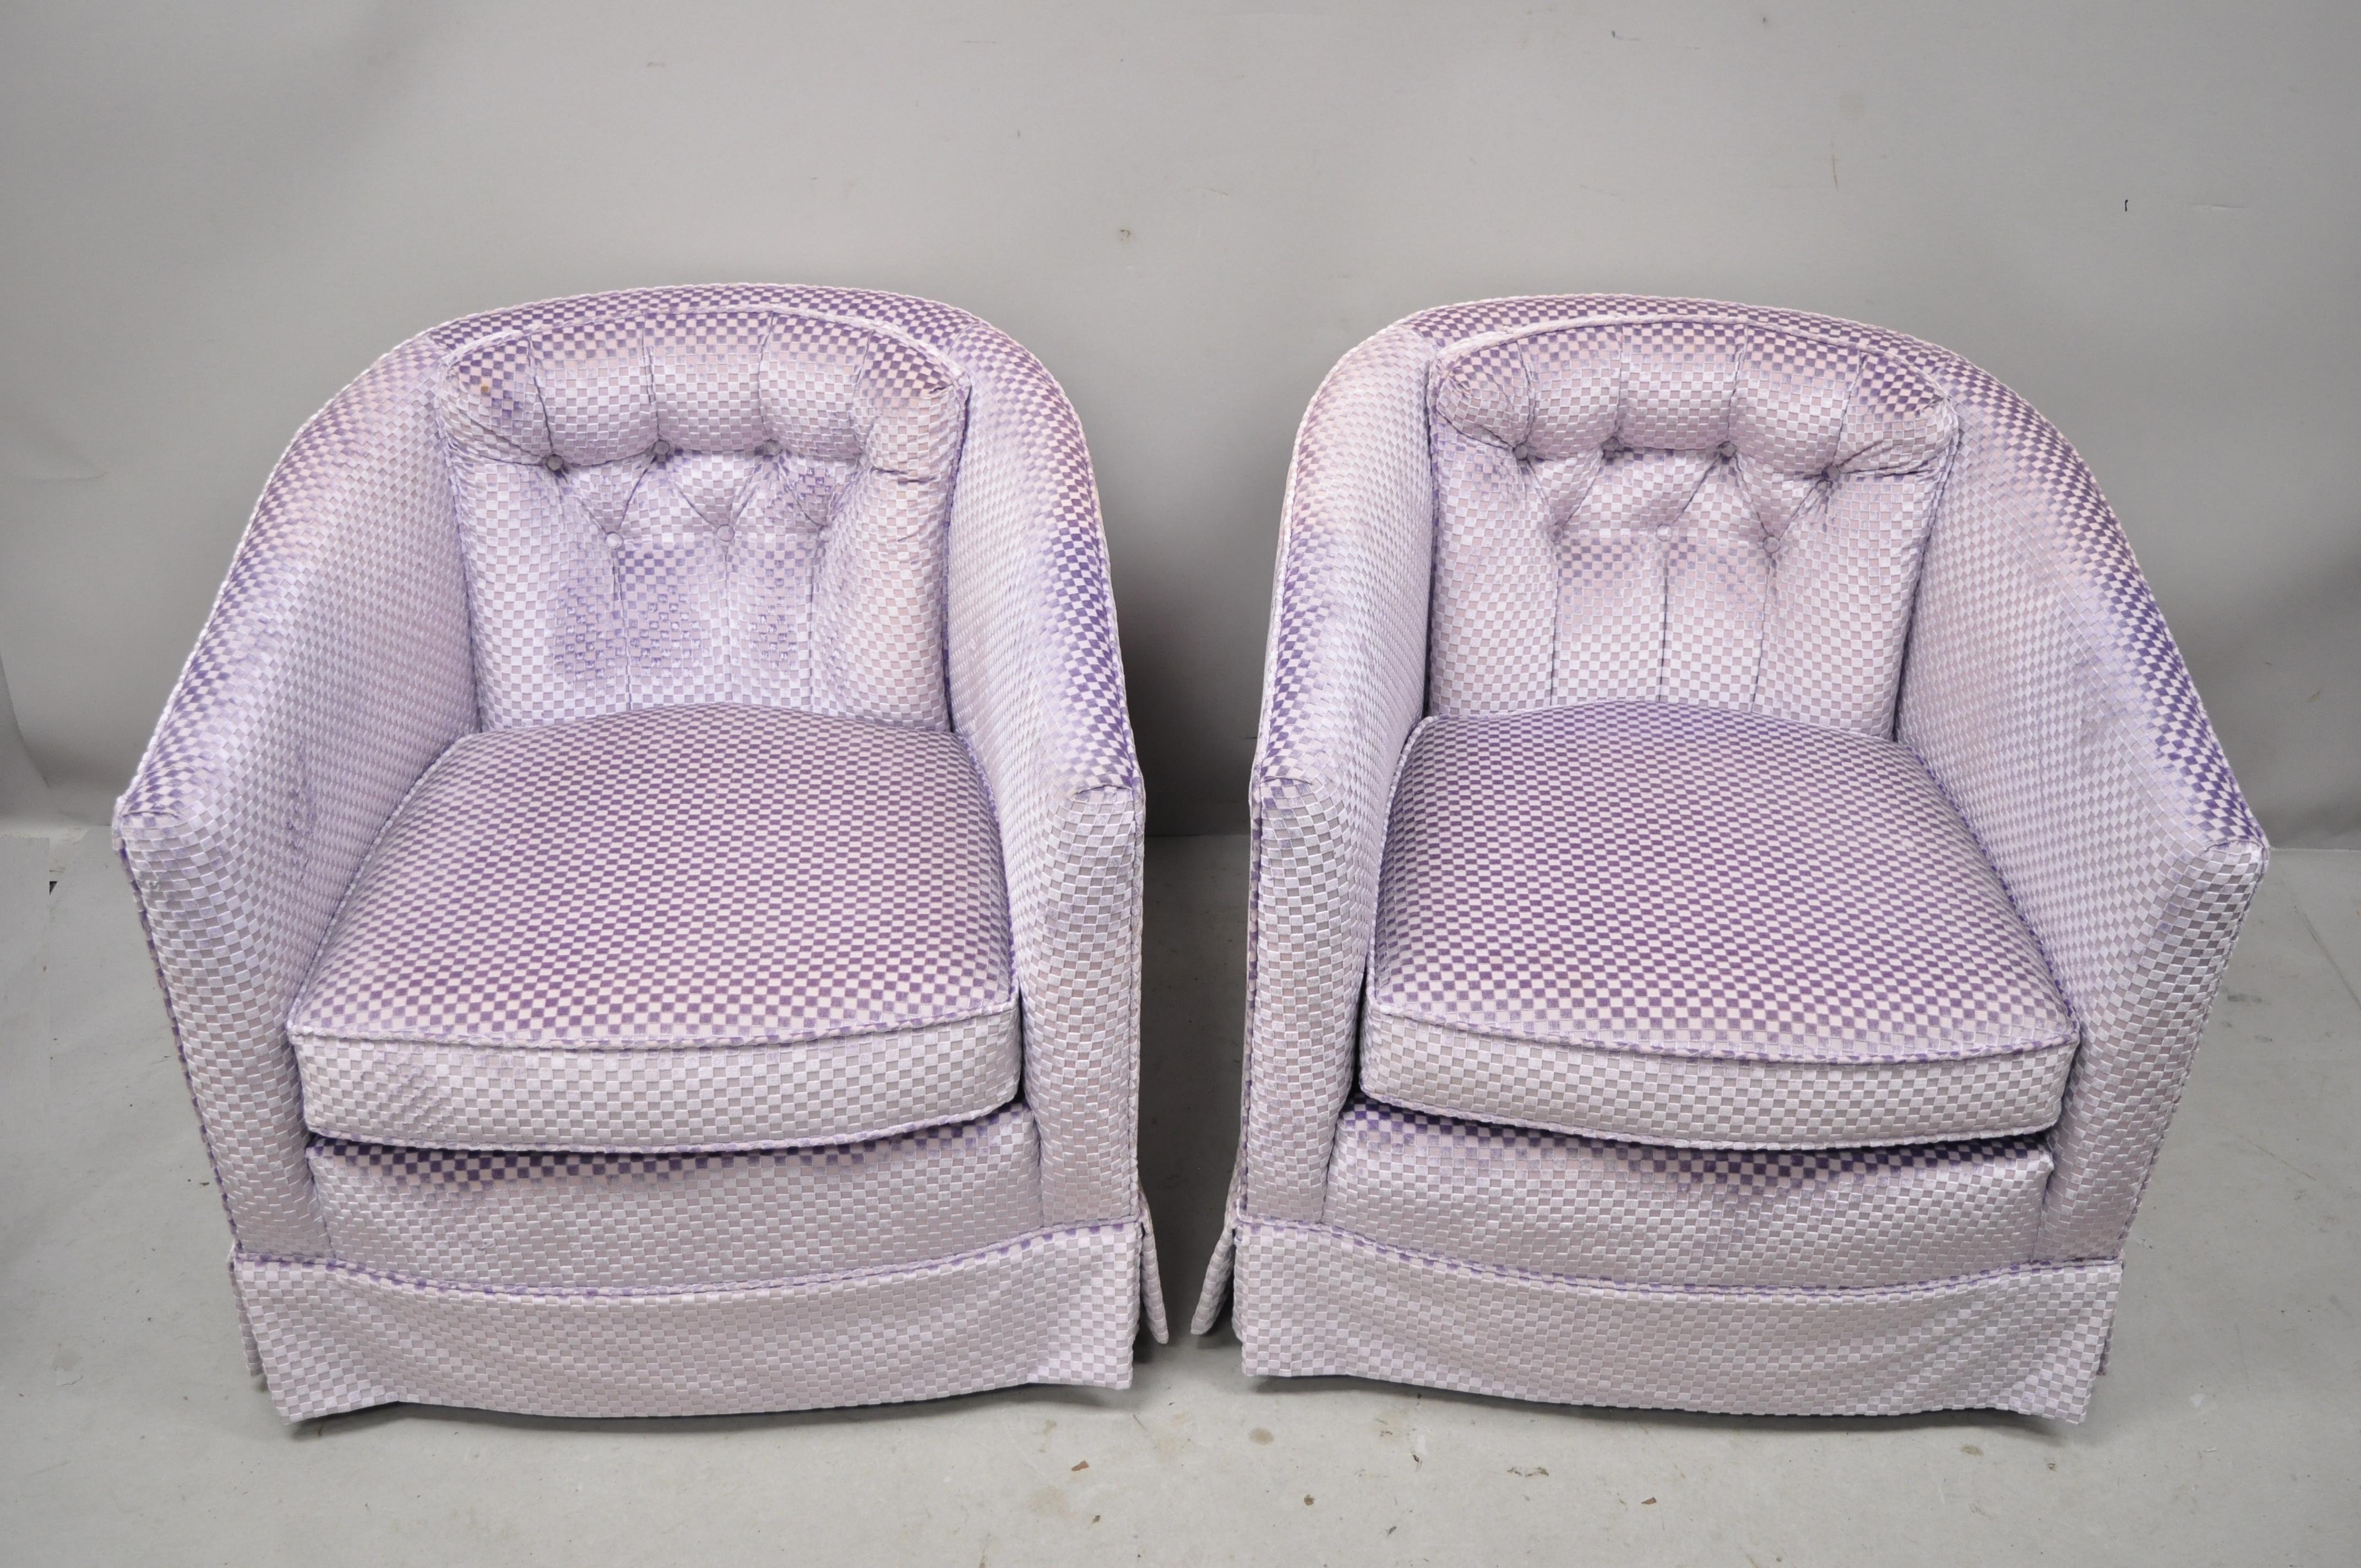 Mid-Century Modern Milo Baughman style purple barrel back club lounge chairs, a pair. Item features remarkable purple geometric print upholstery, skirted frames, loose cushions, tapered legs, clean modernist lines, great style and form, circa